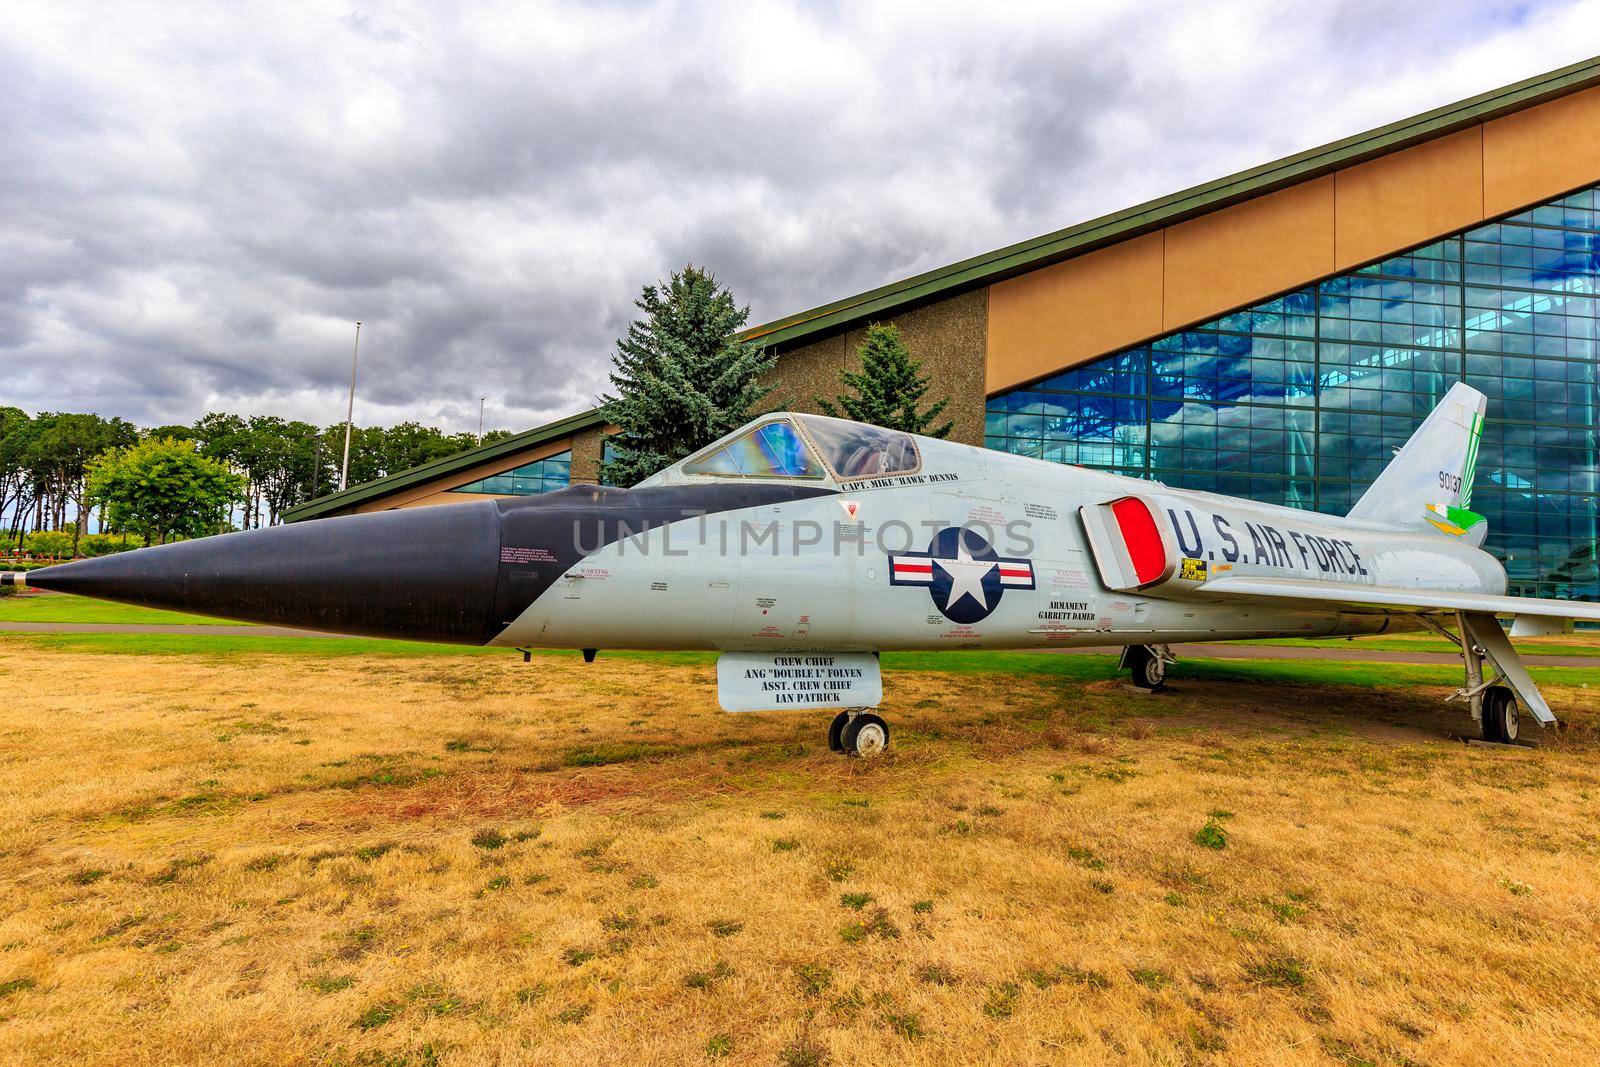 McMinnville, Oregon - August 7, 2016: US Air Force Convair F-106 Delta Dart on exhibition at Evergreen Aviation & Space Museum.